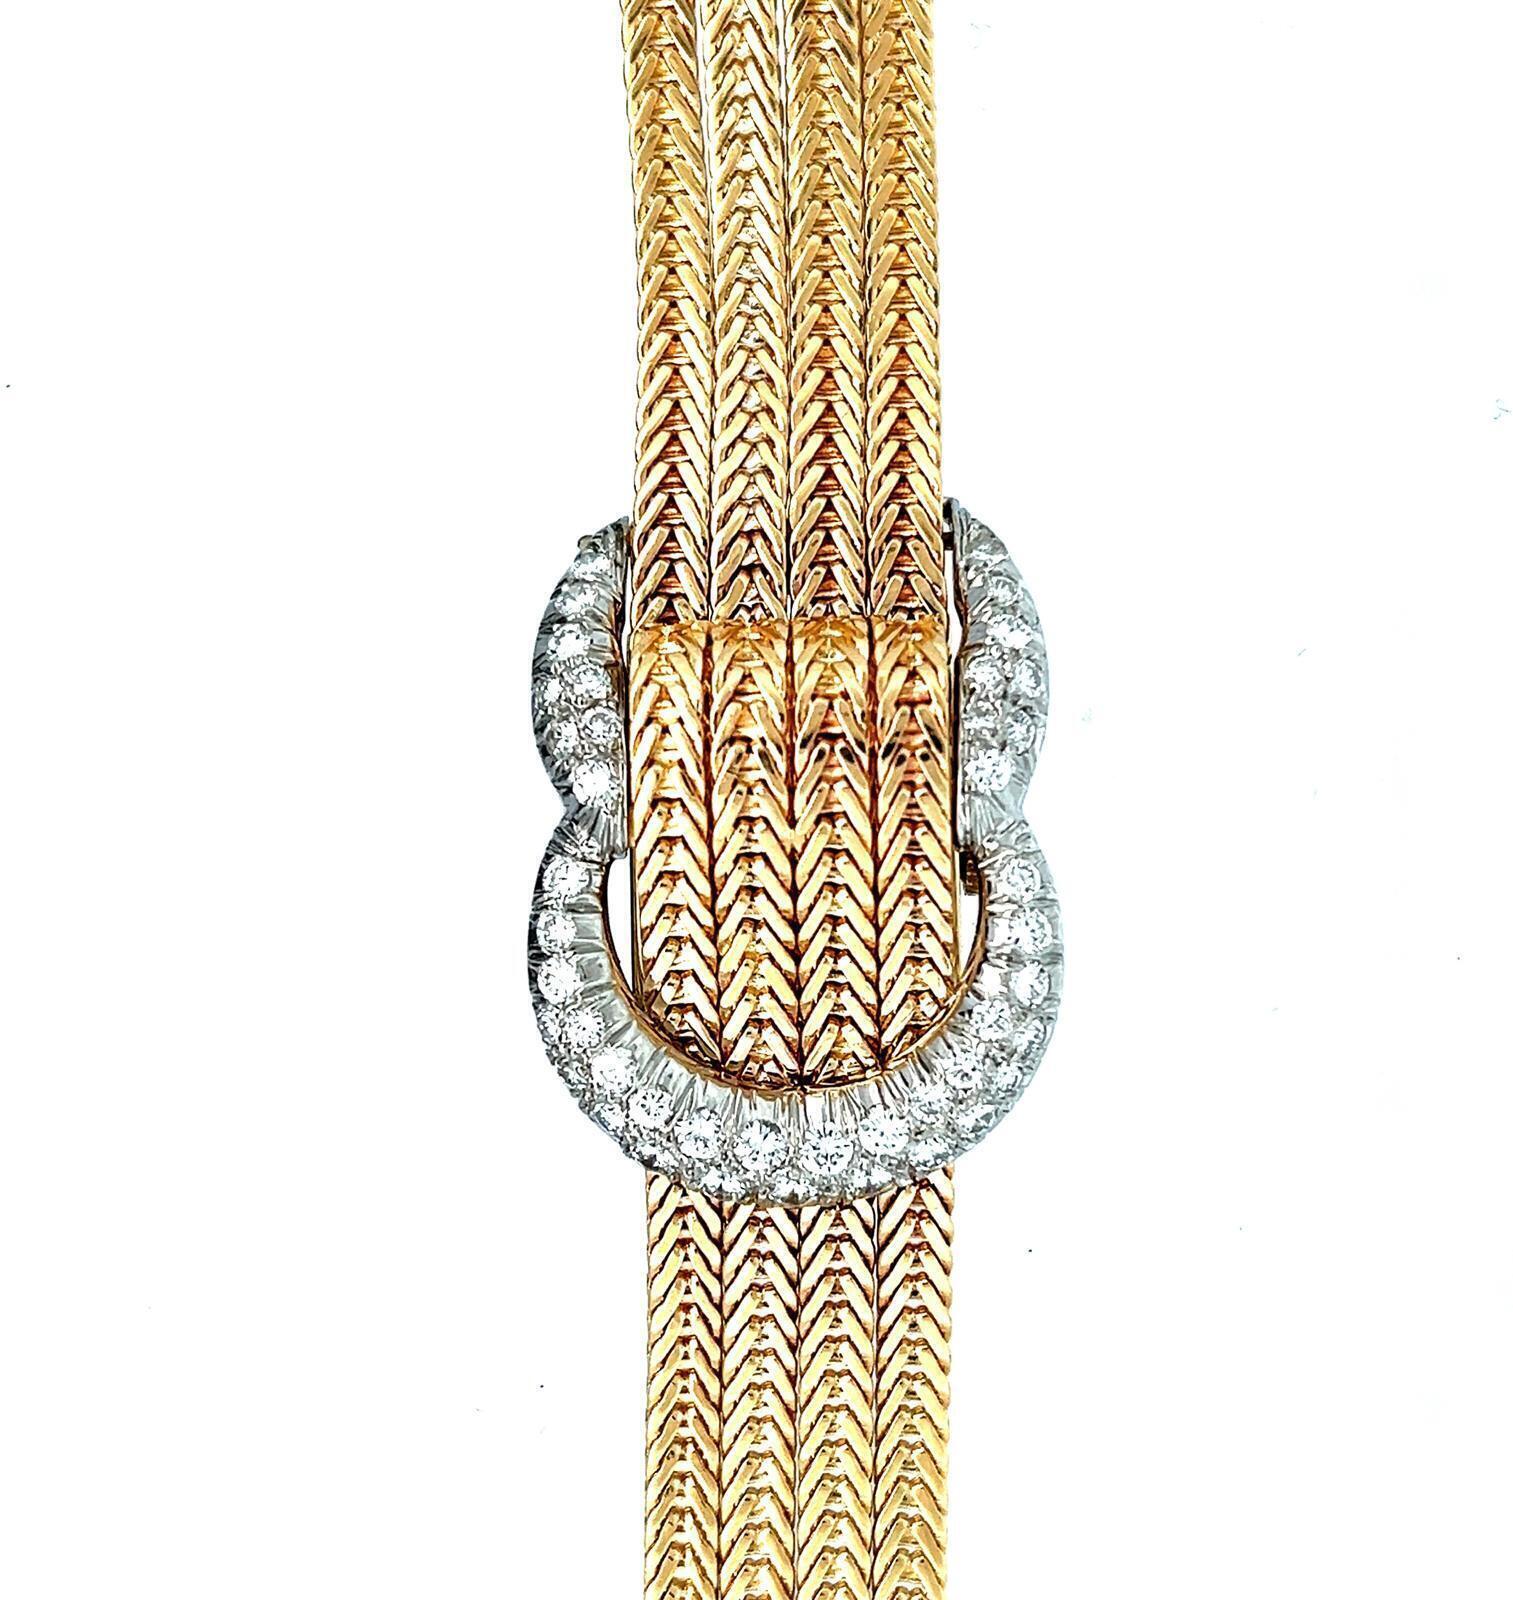 14K GOLD AND DIAMOND PEAK-A-BOO COVERED COCKTAIL WATCH, CIRCA 1955